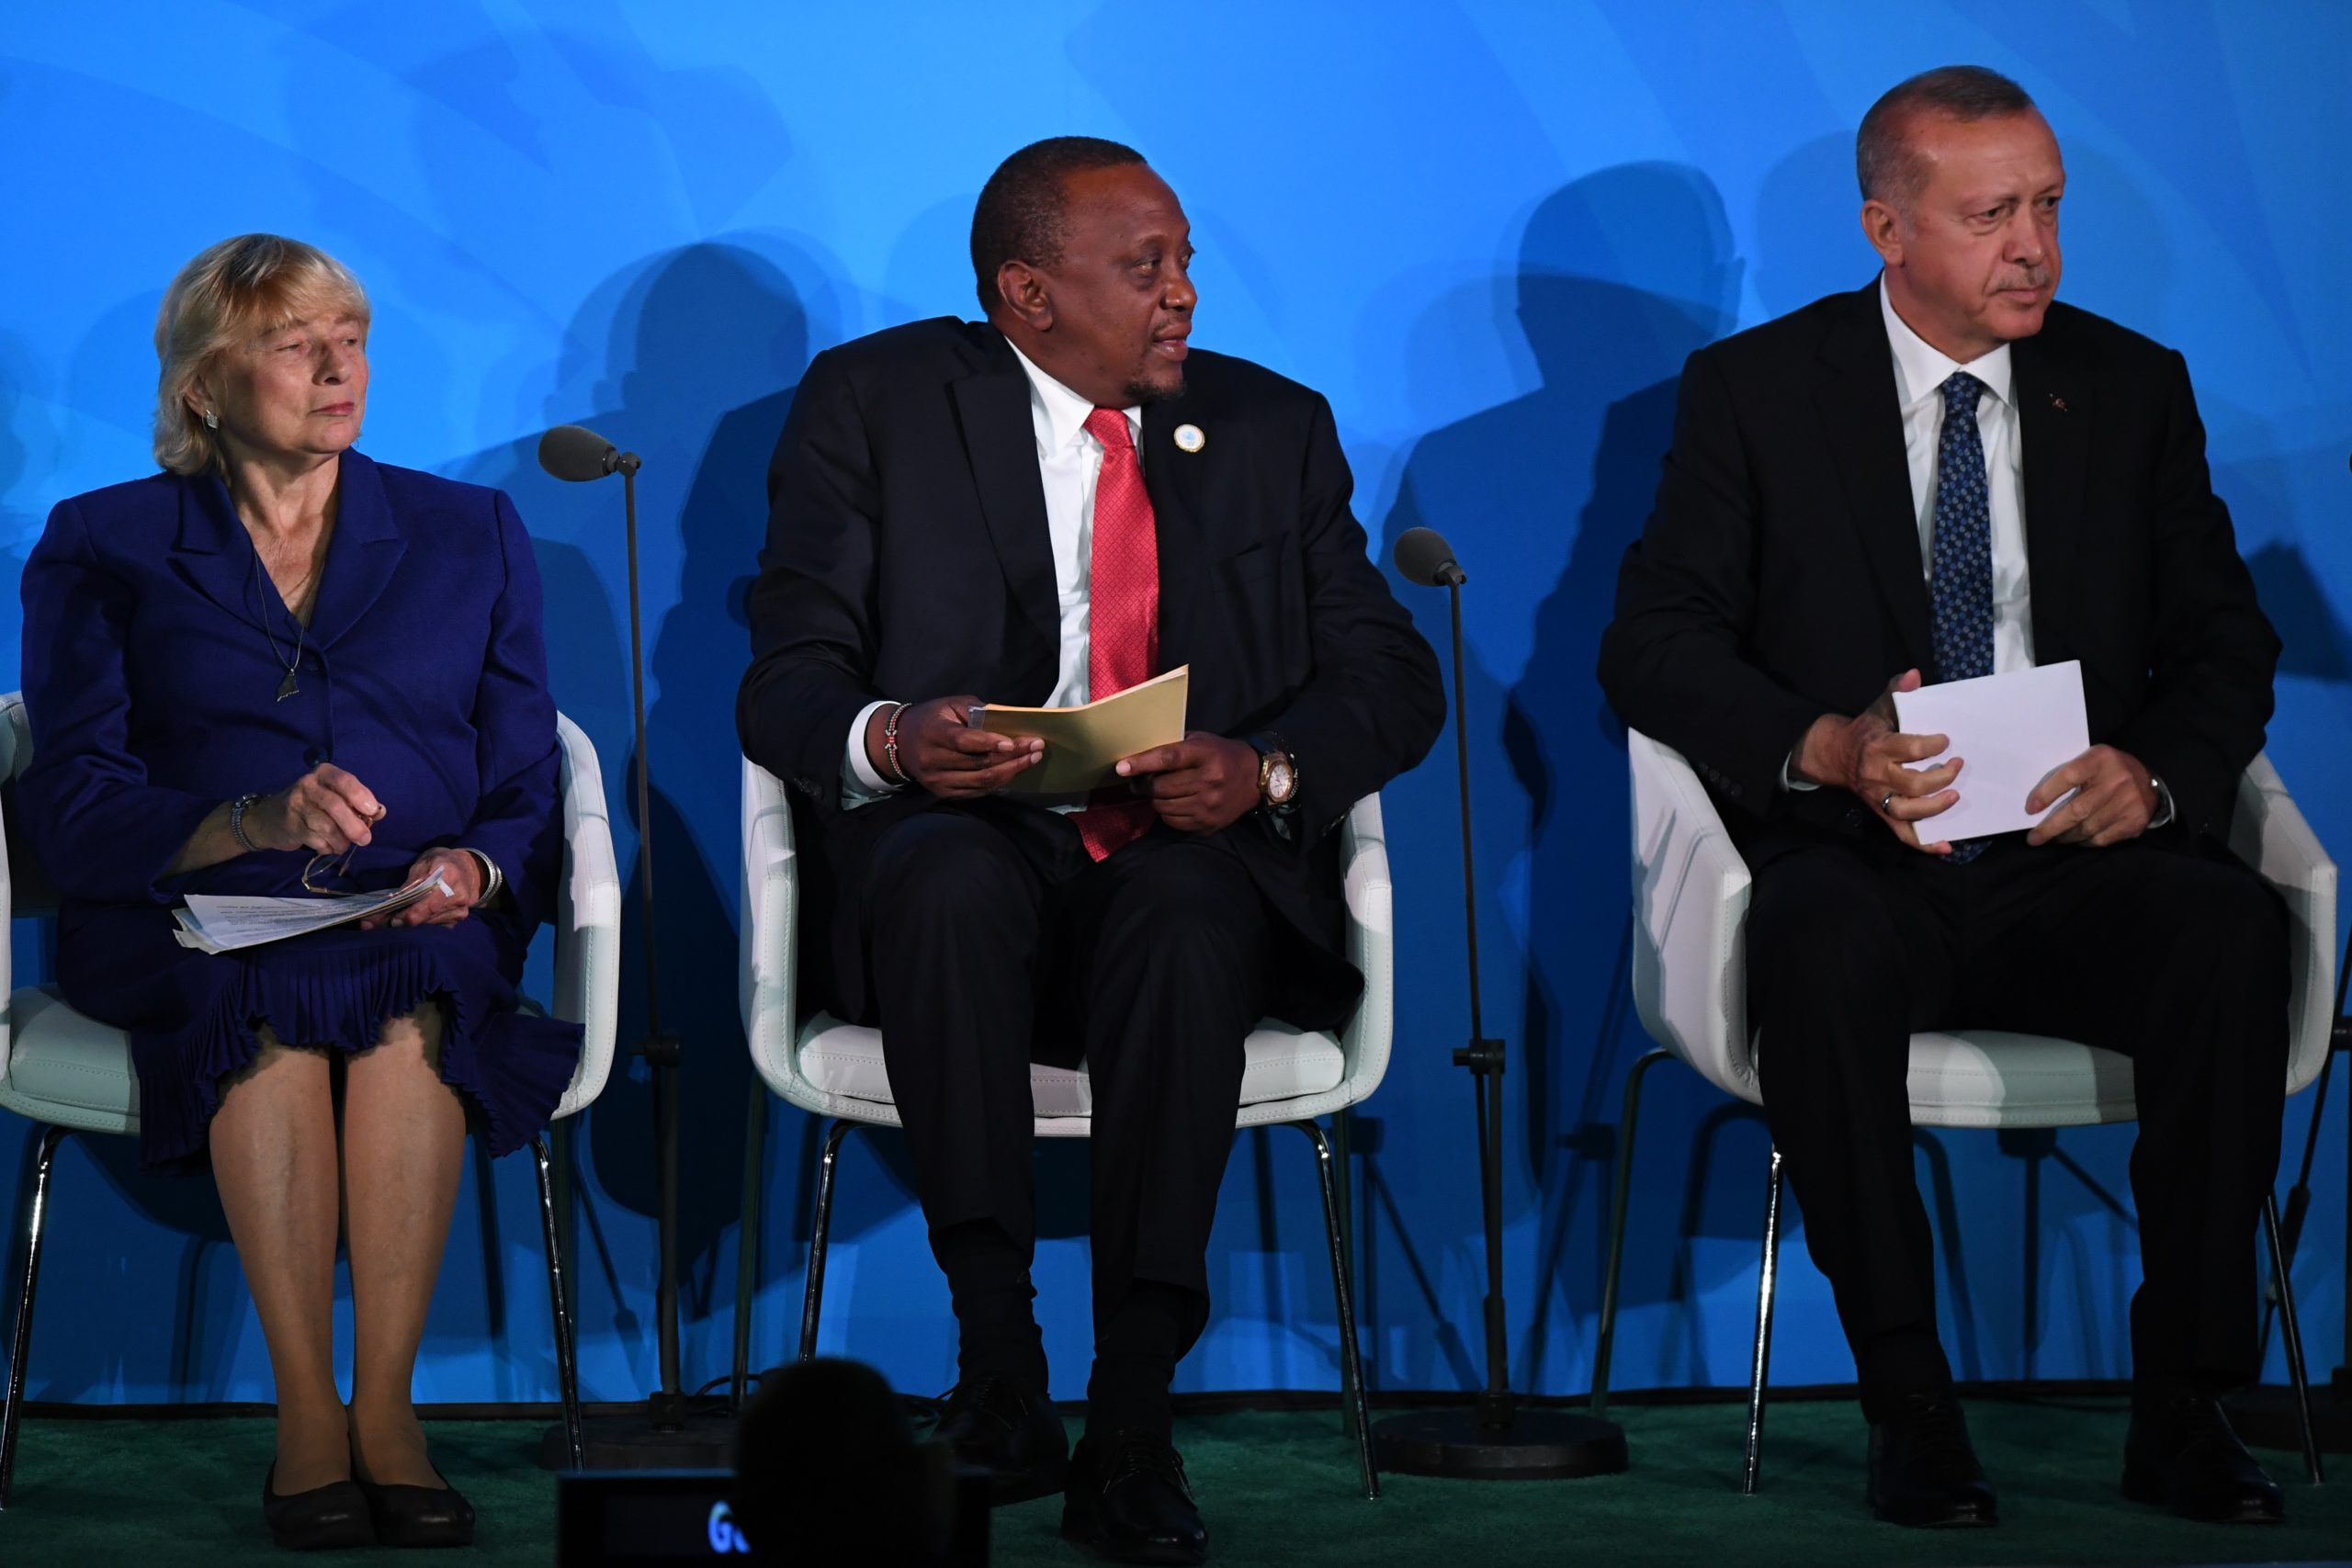 Maine Gov. Janet Mills attends the United Nations Climate Action Summit alongside Kenyan President Uhuru Kenyatta and Turkish President Recep Tayyip Erdogan on Sept. 23, 2019 in New York City. (Timothy A. Clary/AFP via Getty Images)